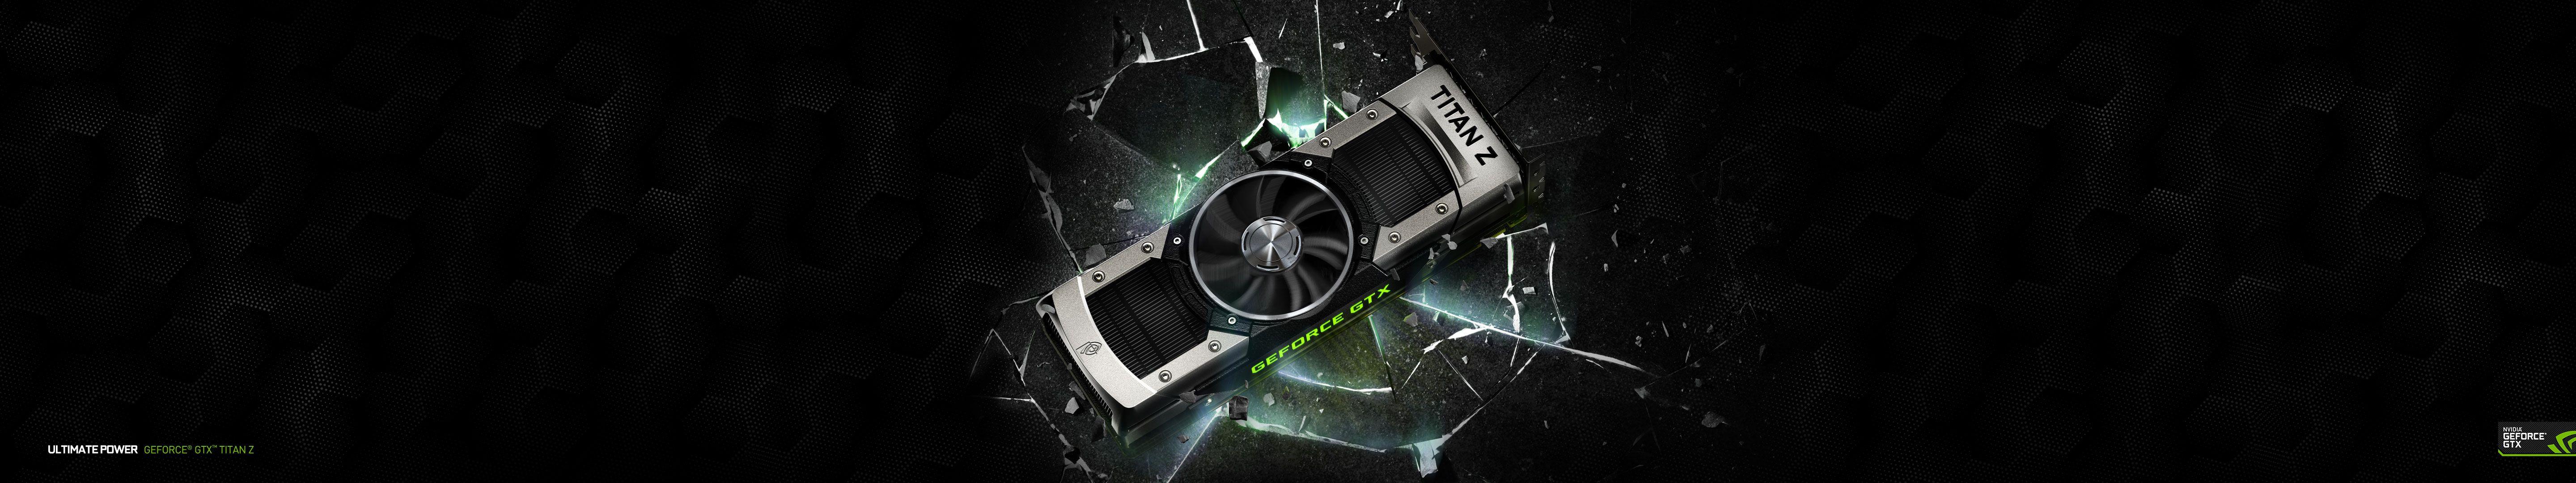 5760 X 1080 Nvidia Wallpapers Top Free 5760 X 1080 Nvidia Backgrounds Wallpaperaccess